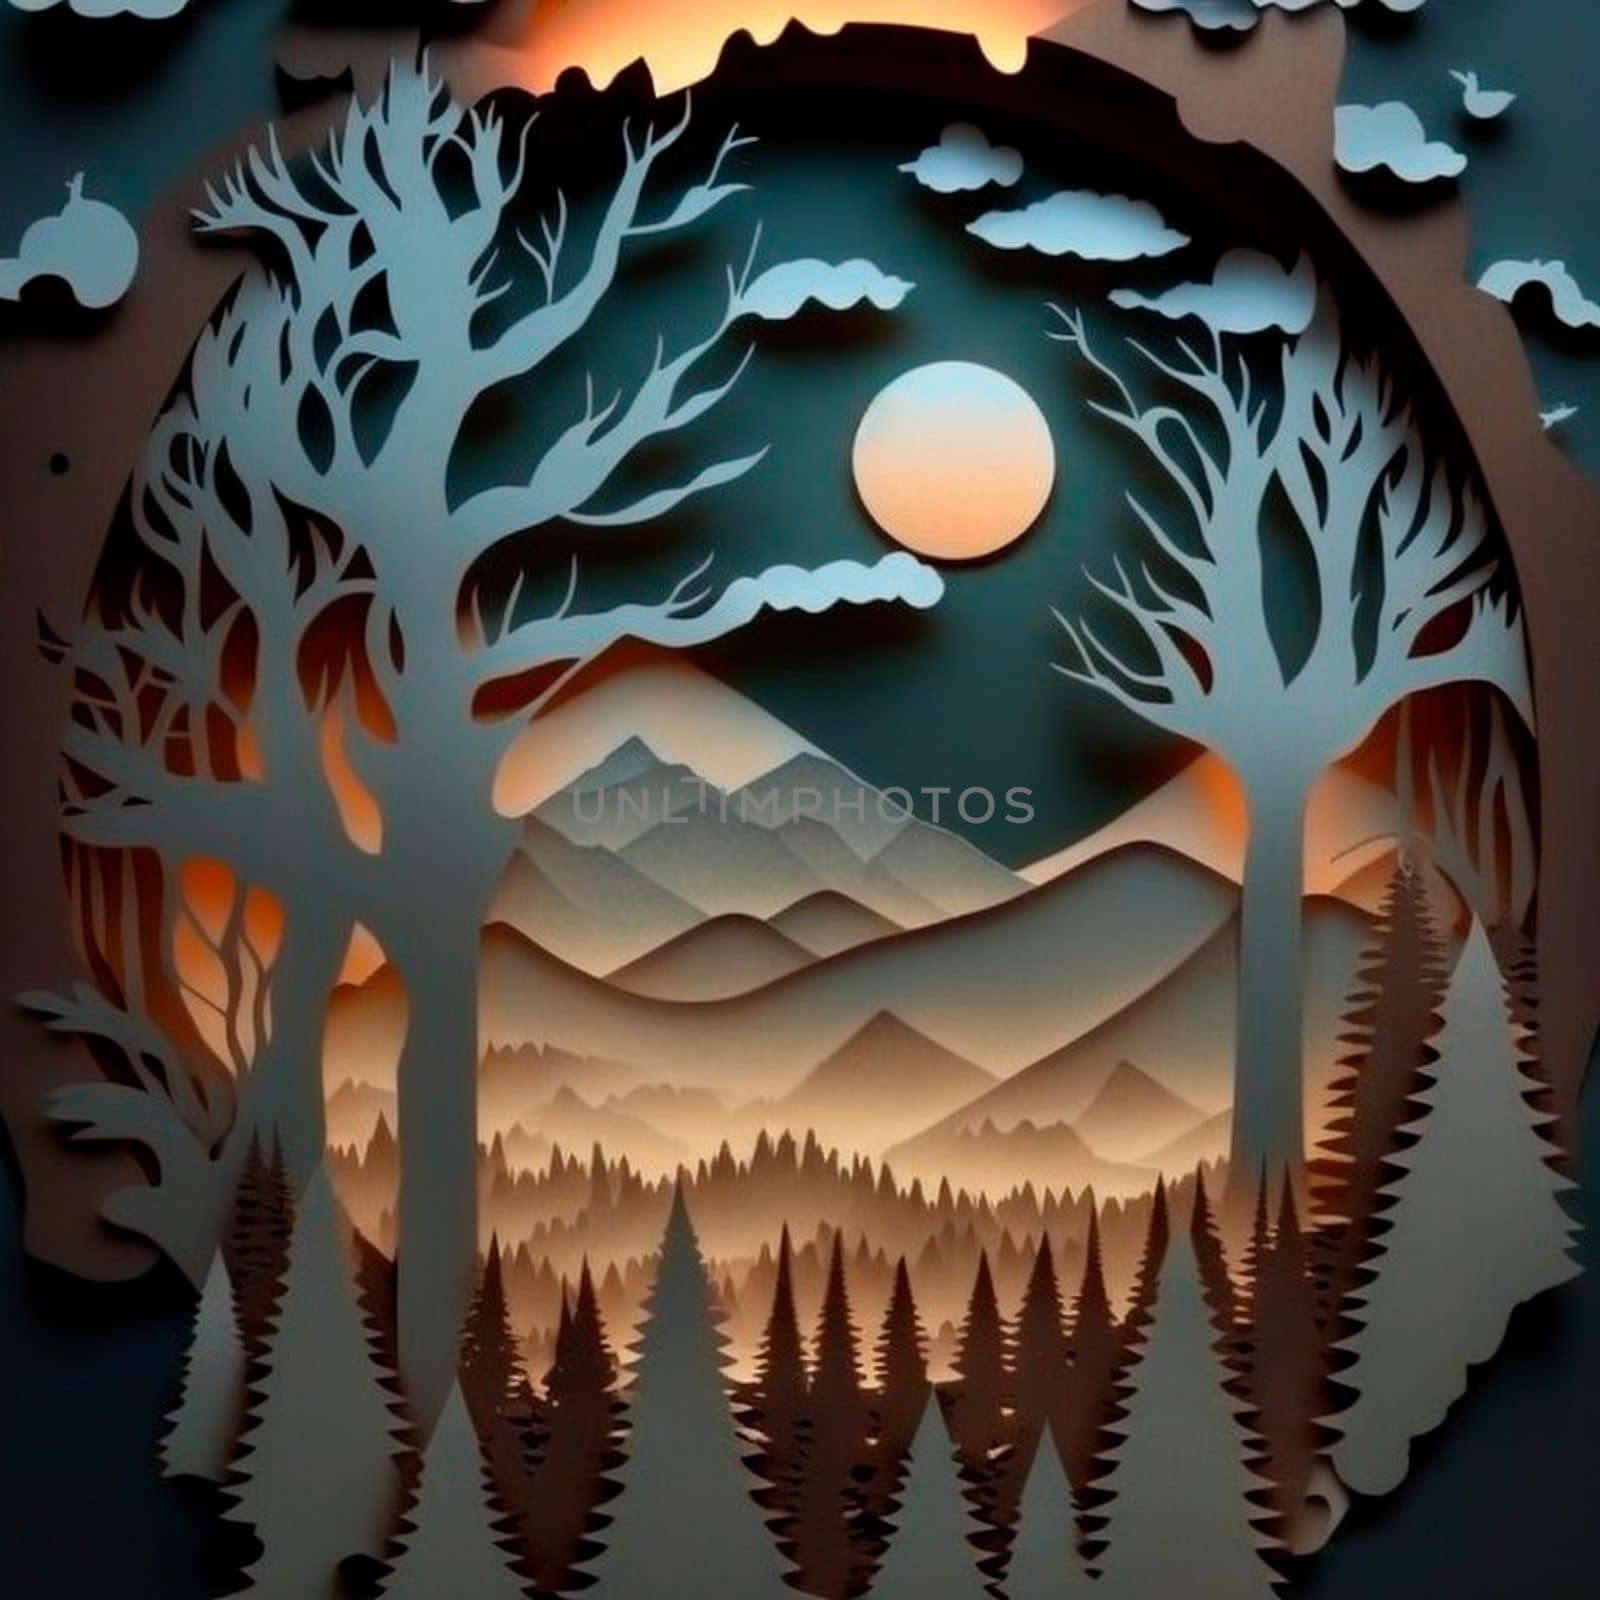 multi-layered crafts made of paper. Mountains, trees, forest and clouds by NeuroSky